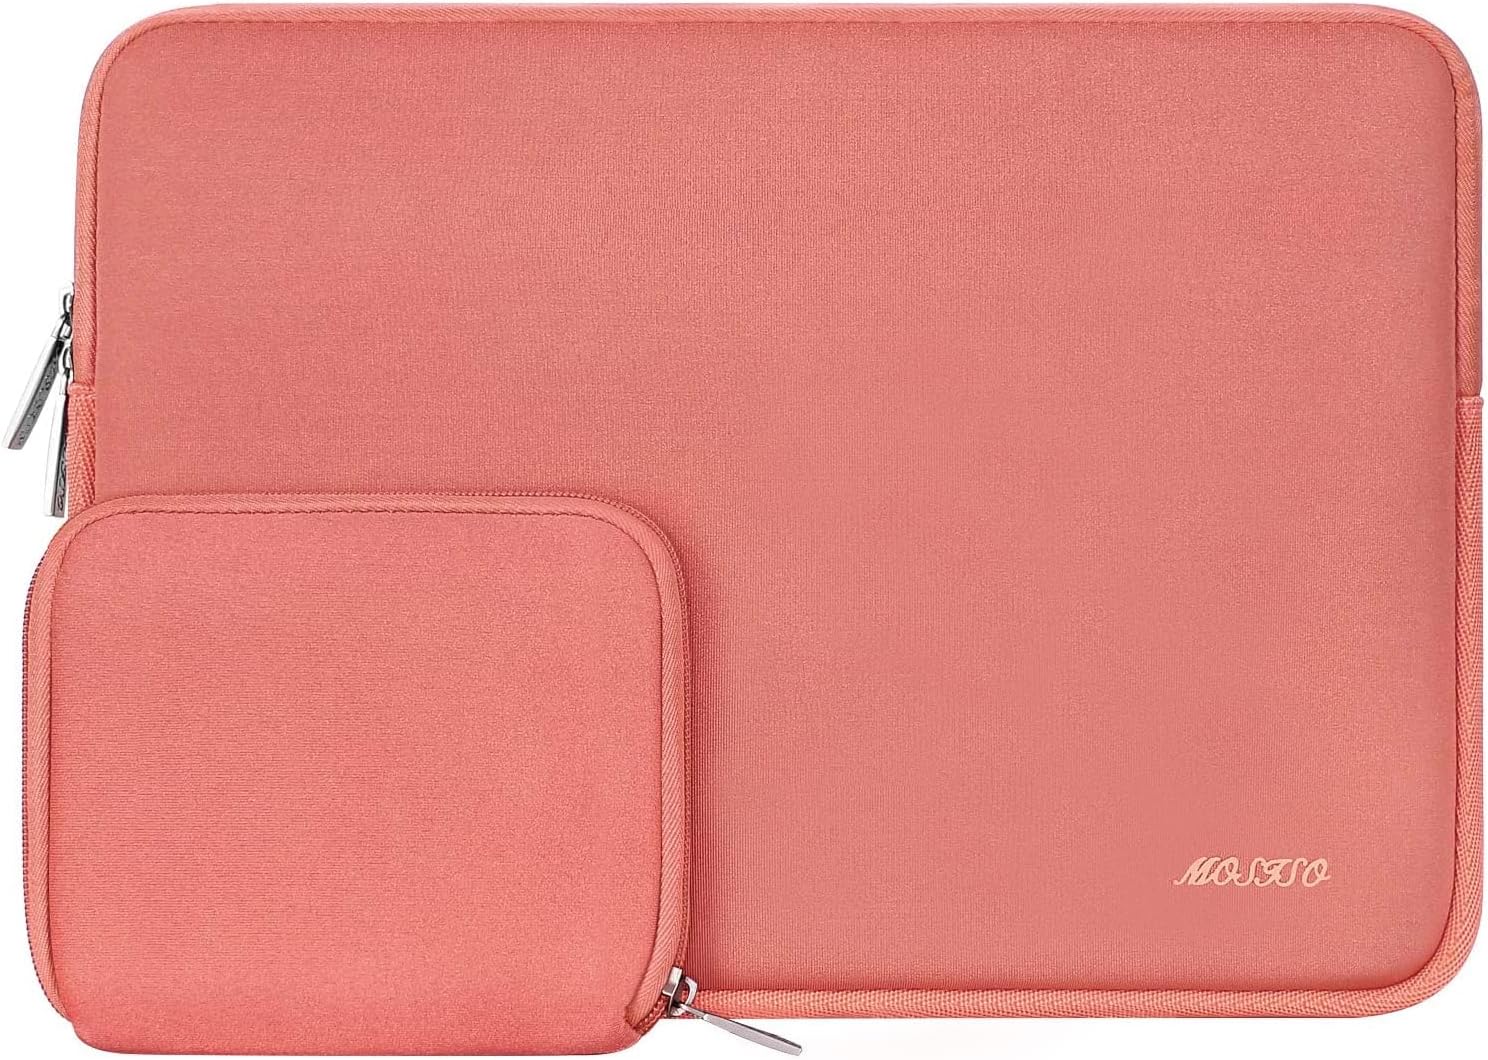 MOSISO Laptop Sleeve Compatible with MacBook Air/Pro, [...]